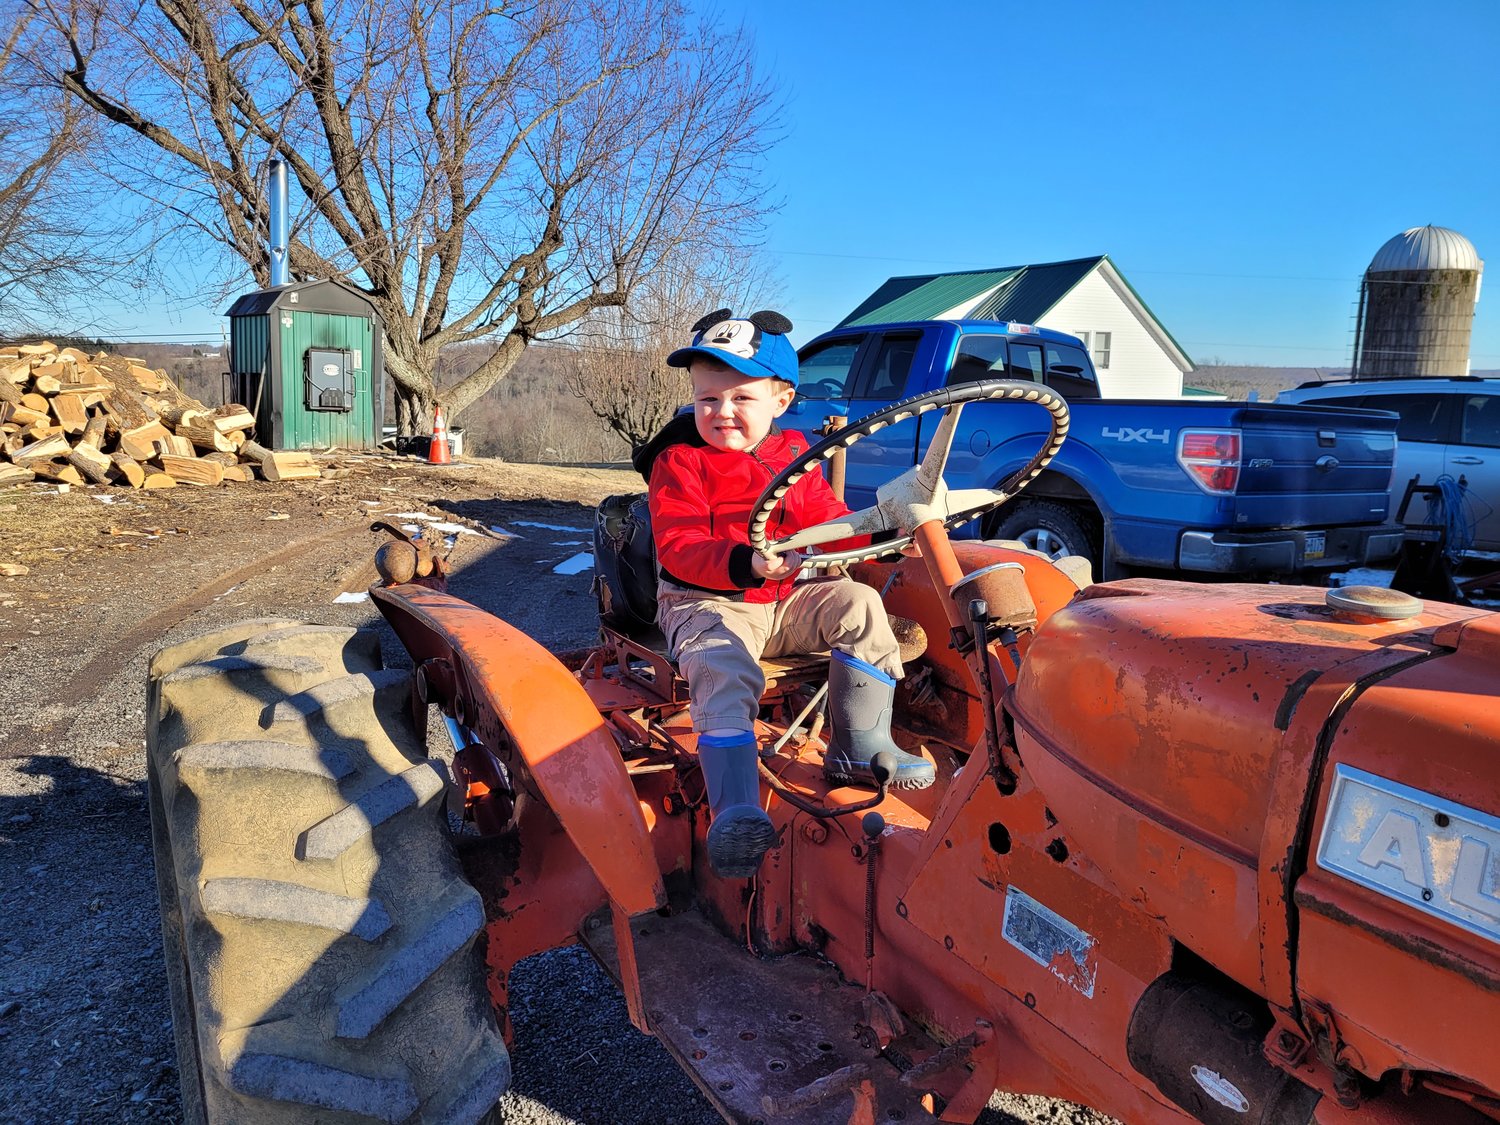 It was a sunny day full of smiles when the family got to enjoy our new old tractor for the first time.